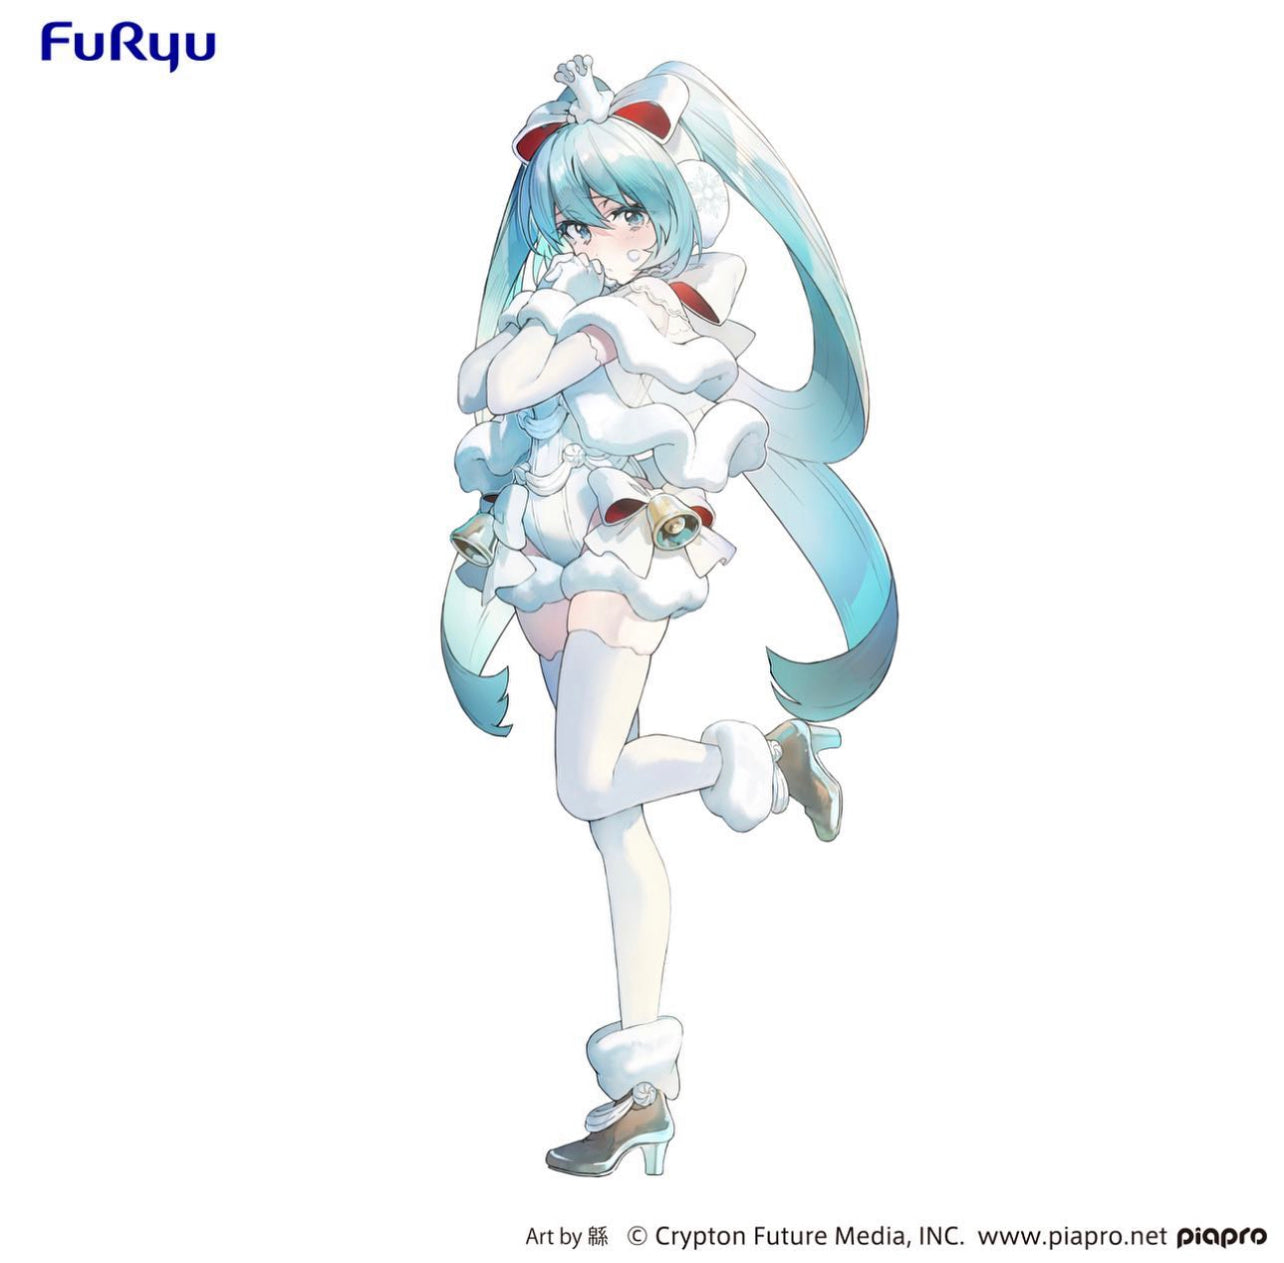 PREORDER - 50% NON REFUNDABLE DEPOSIT - Vocaloid - Hatsune Miku - Exceed Creative Figure - Sweet Sweets - Christmas from Furyu  Arrival January 2024